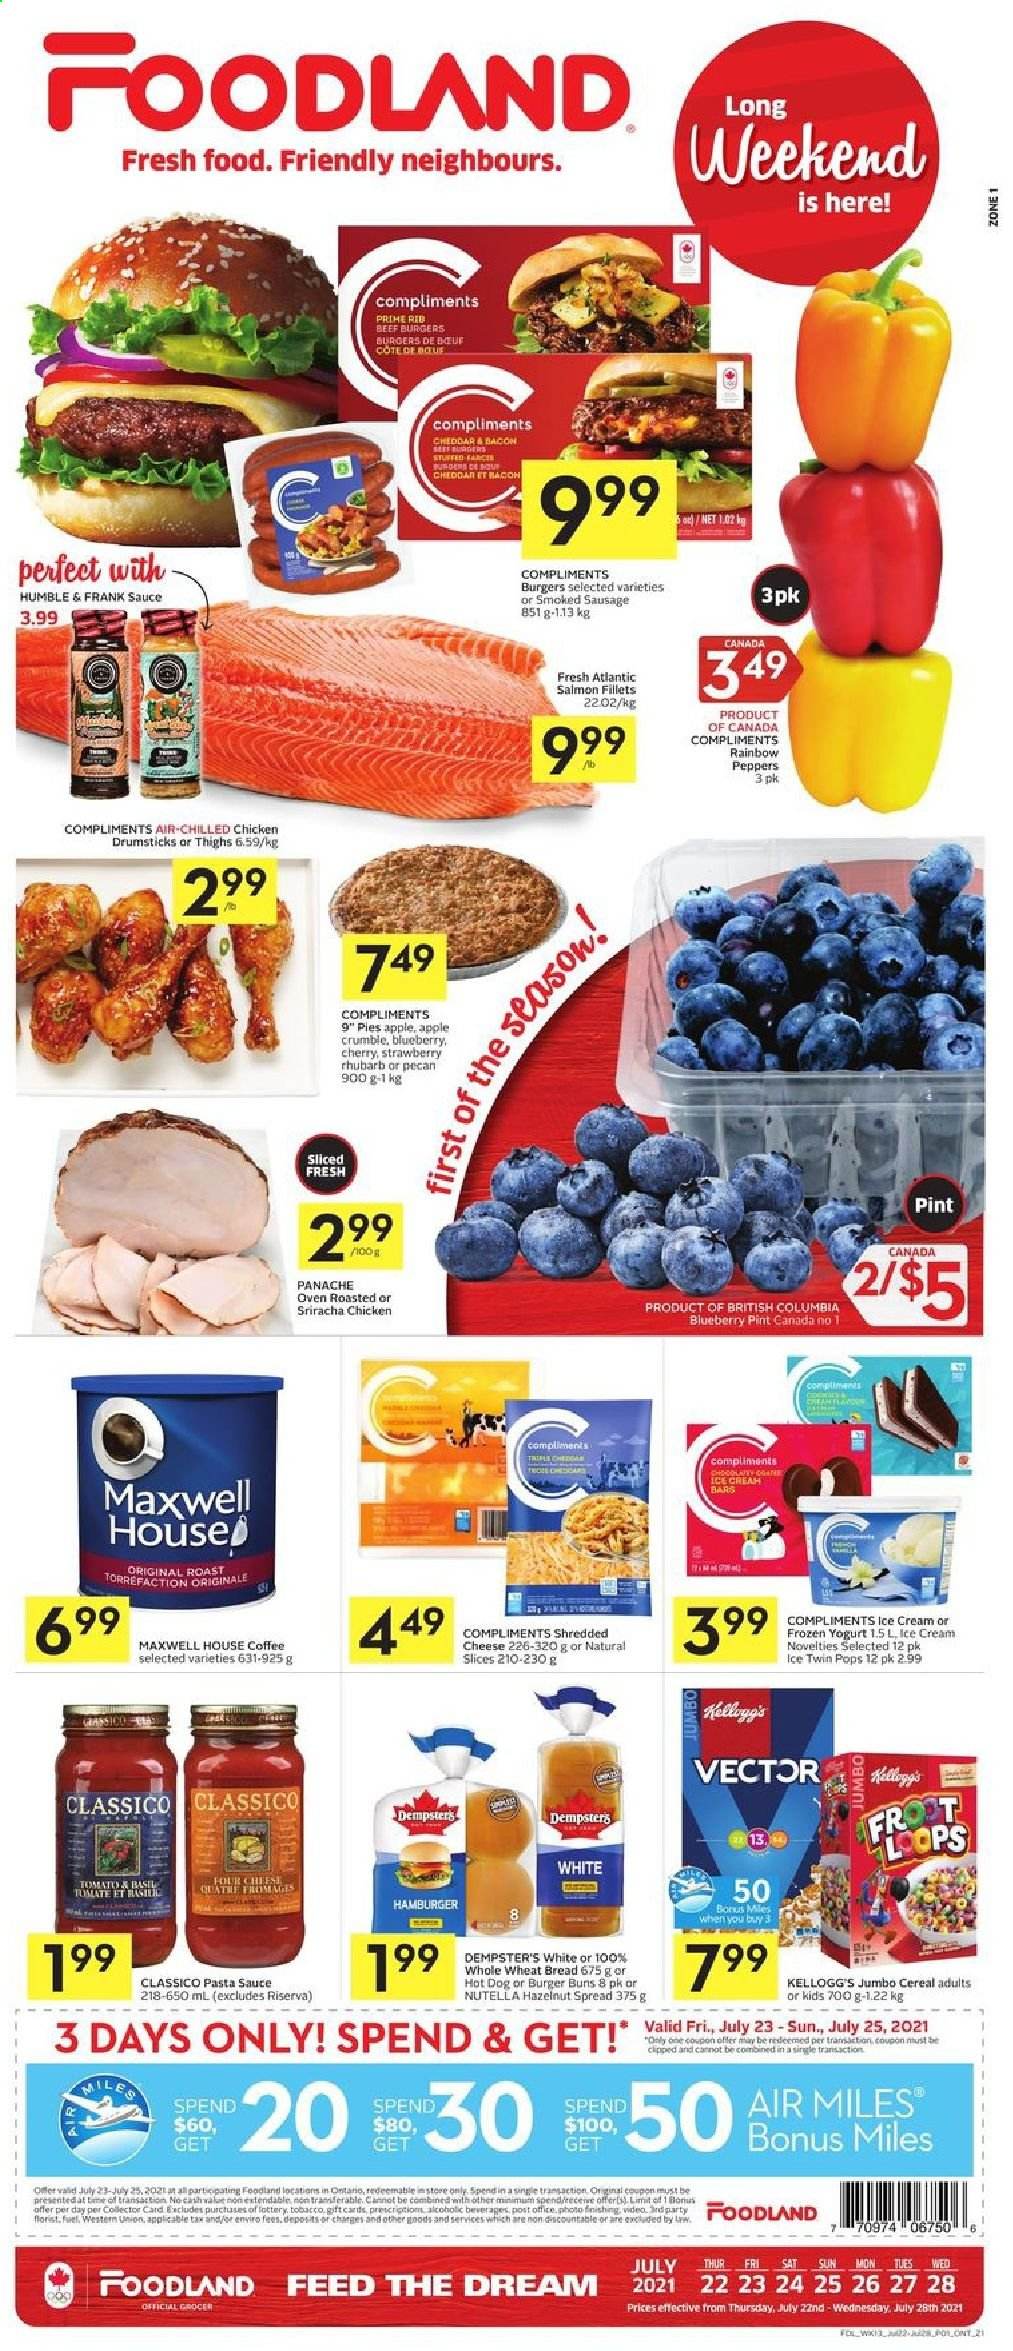 thumbnail - Foodland Flyer - July 22, 2021 - July 28, 2021 - Sales products - wheat bread, buns, burger buns, rhubarb, peppers, salmon, salmon fillet, hot dog, pasta sauce, sauce, beef burger, bacon, sausage, smoked sausage, shredded cheese, cheddar, yoghurt, ice cream, Kellogg's, cereals, esponja, sriracha, Classico, hazelnut spread, Maxwell House, coffee, chicken drumsticks, chicken, Nutella. Page 1.